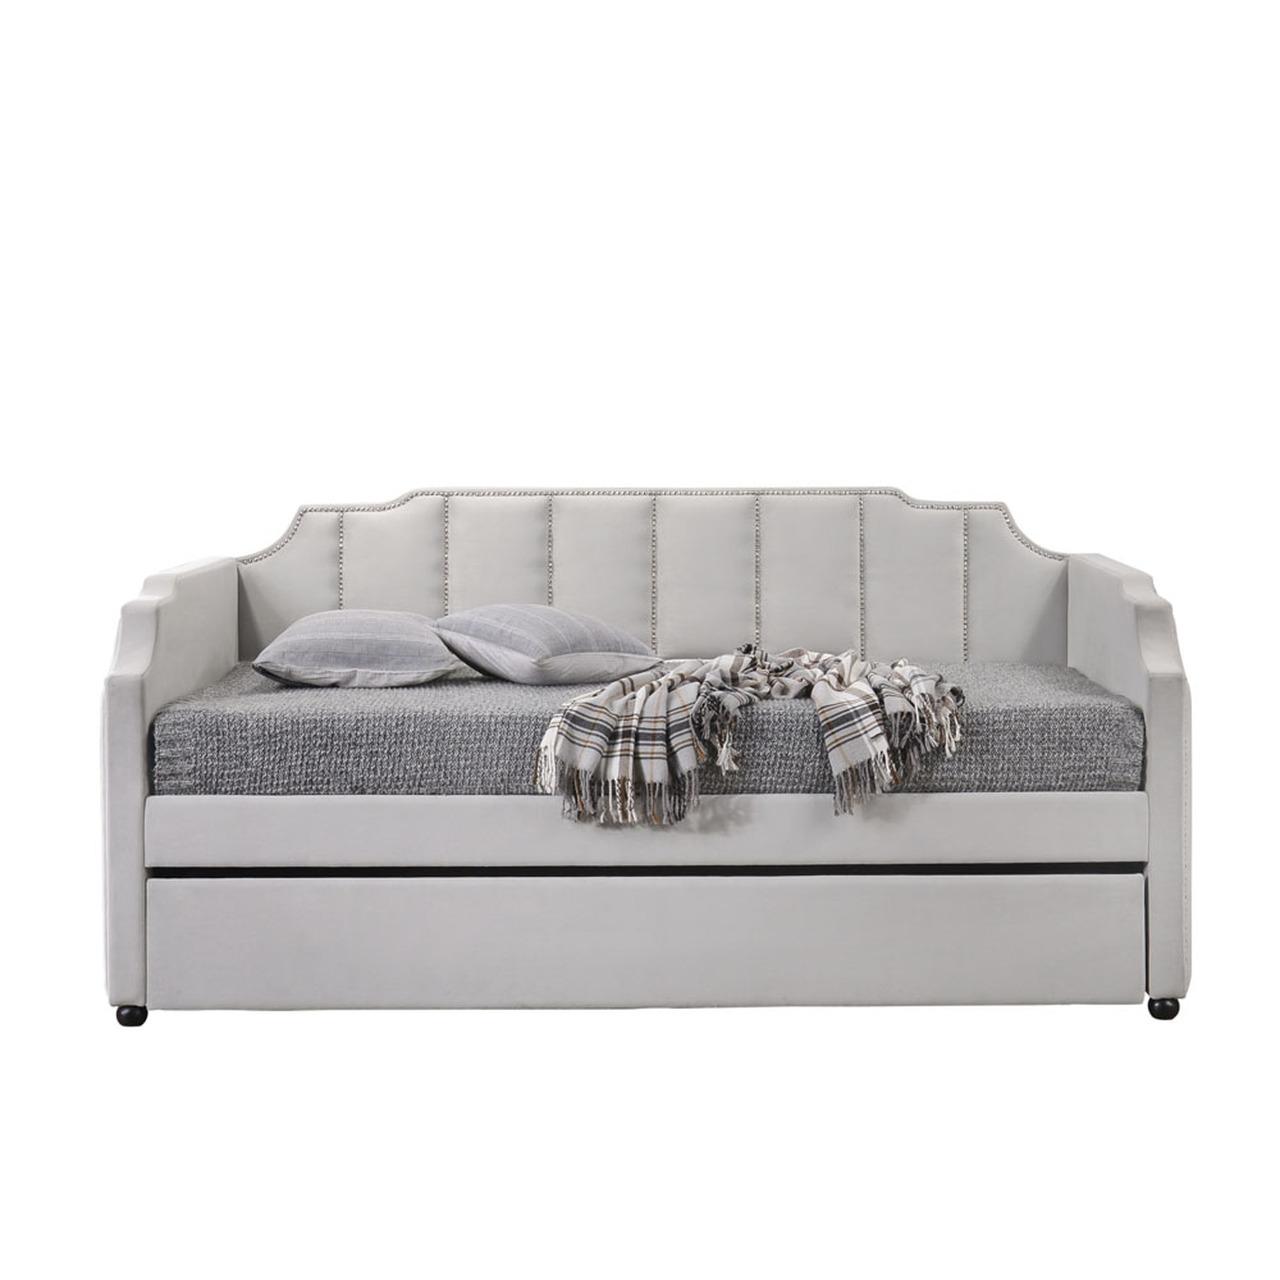 Acme Furniture Peridot Daybed w/ trundle